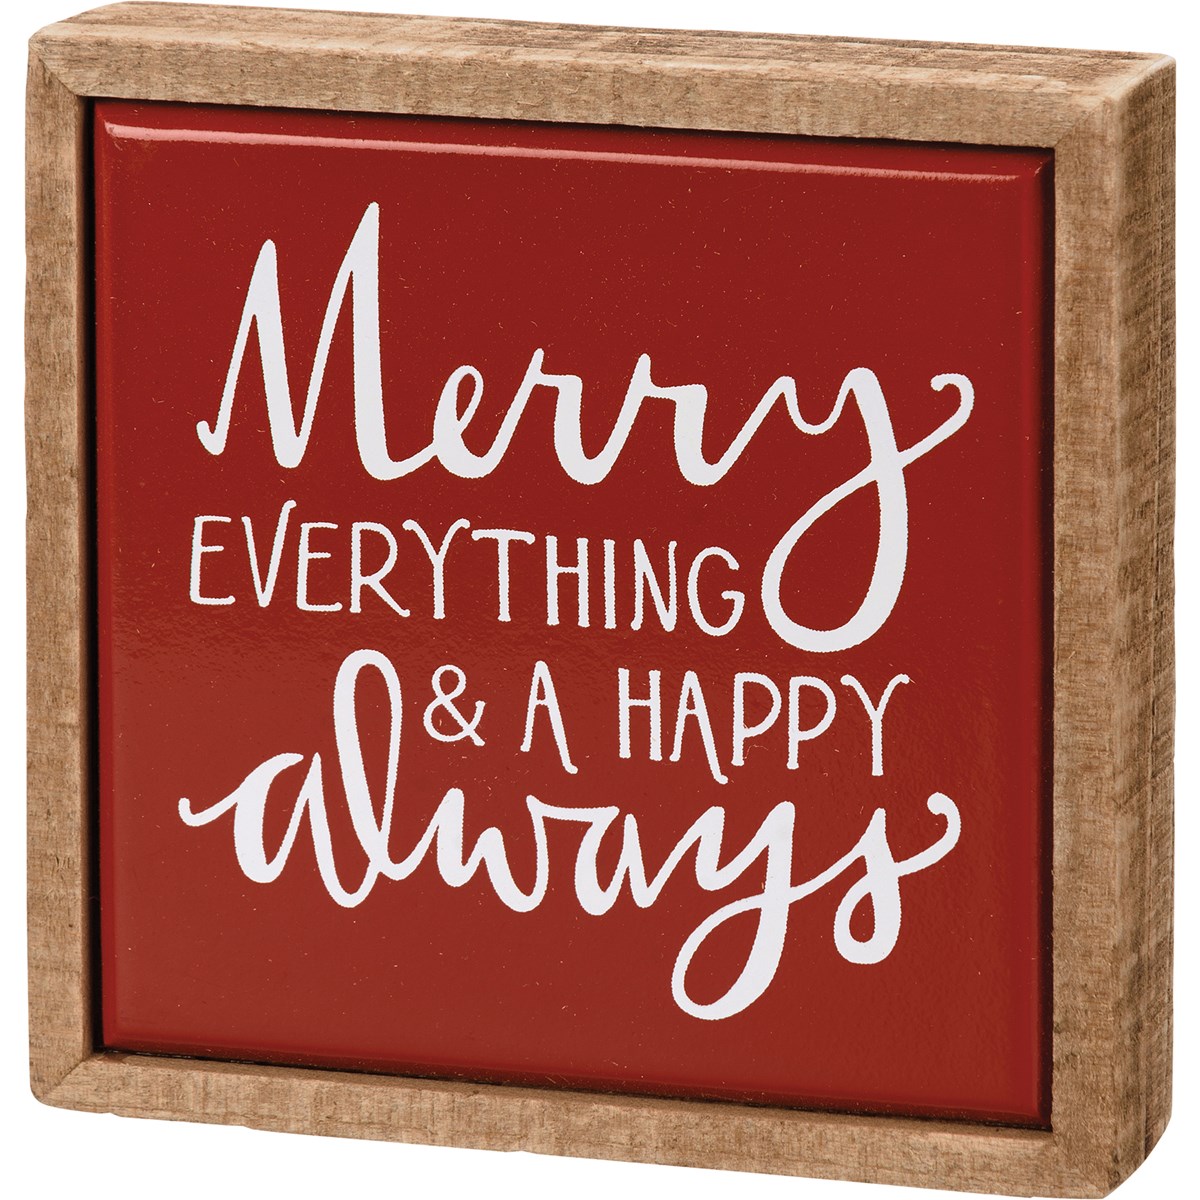 Merry Everything & A Happy Always Box Sign Mini - Wood